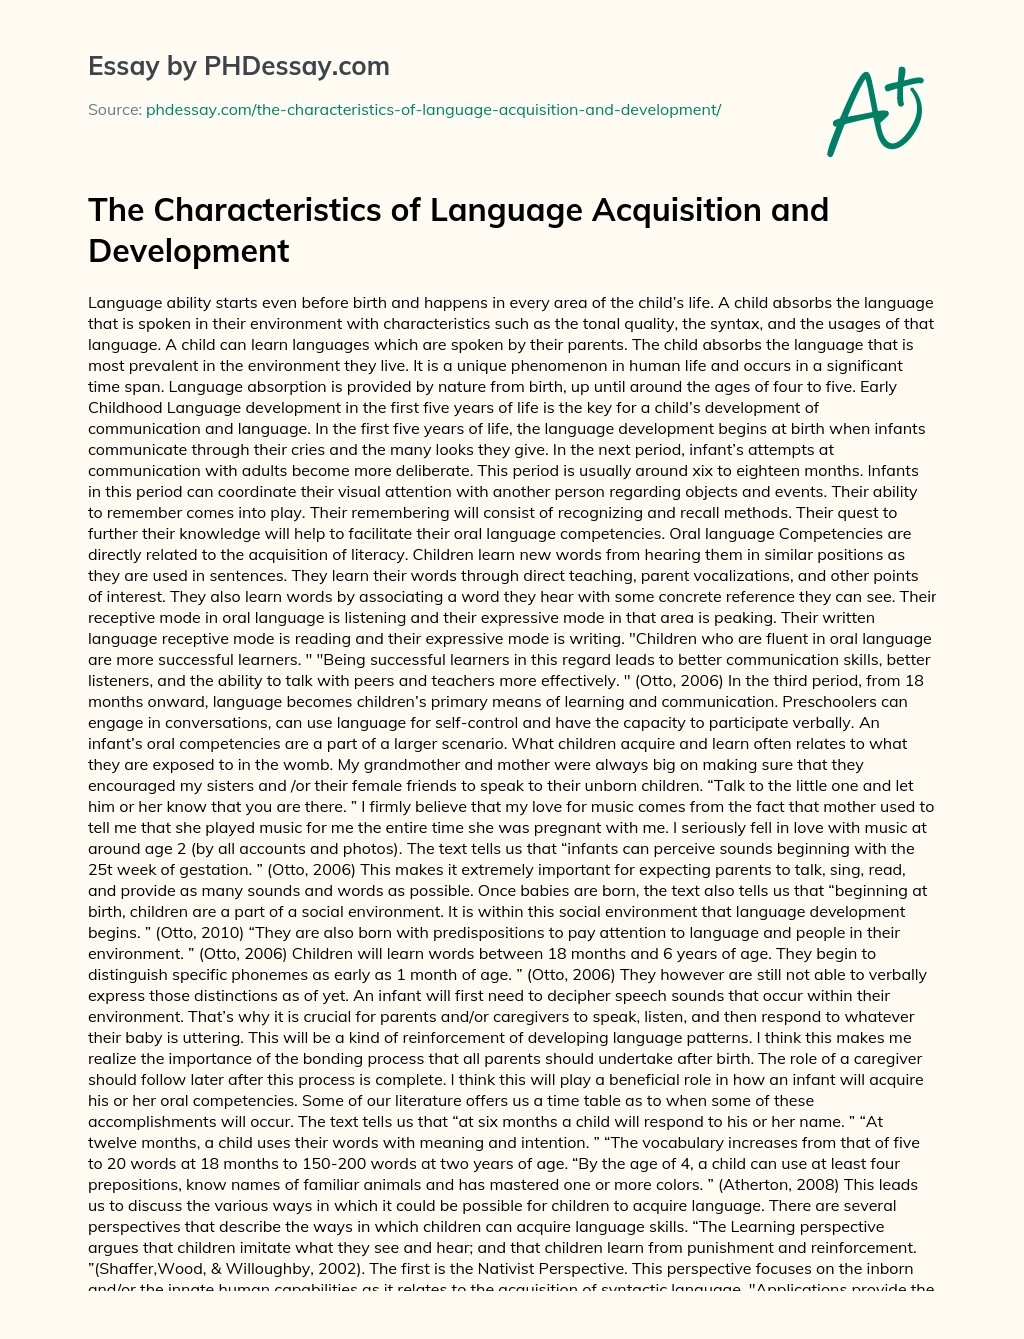 The Characteristics of Language Acquisition and Development essay